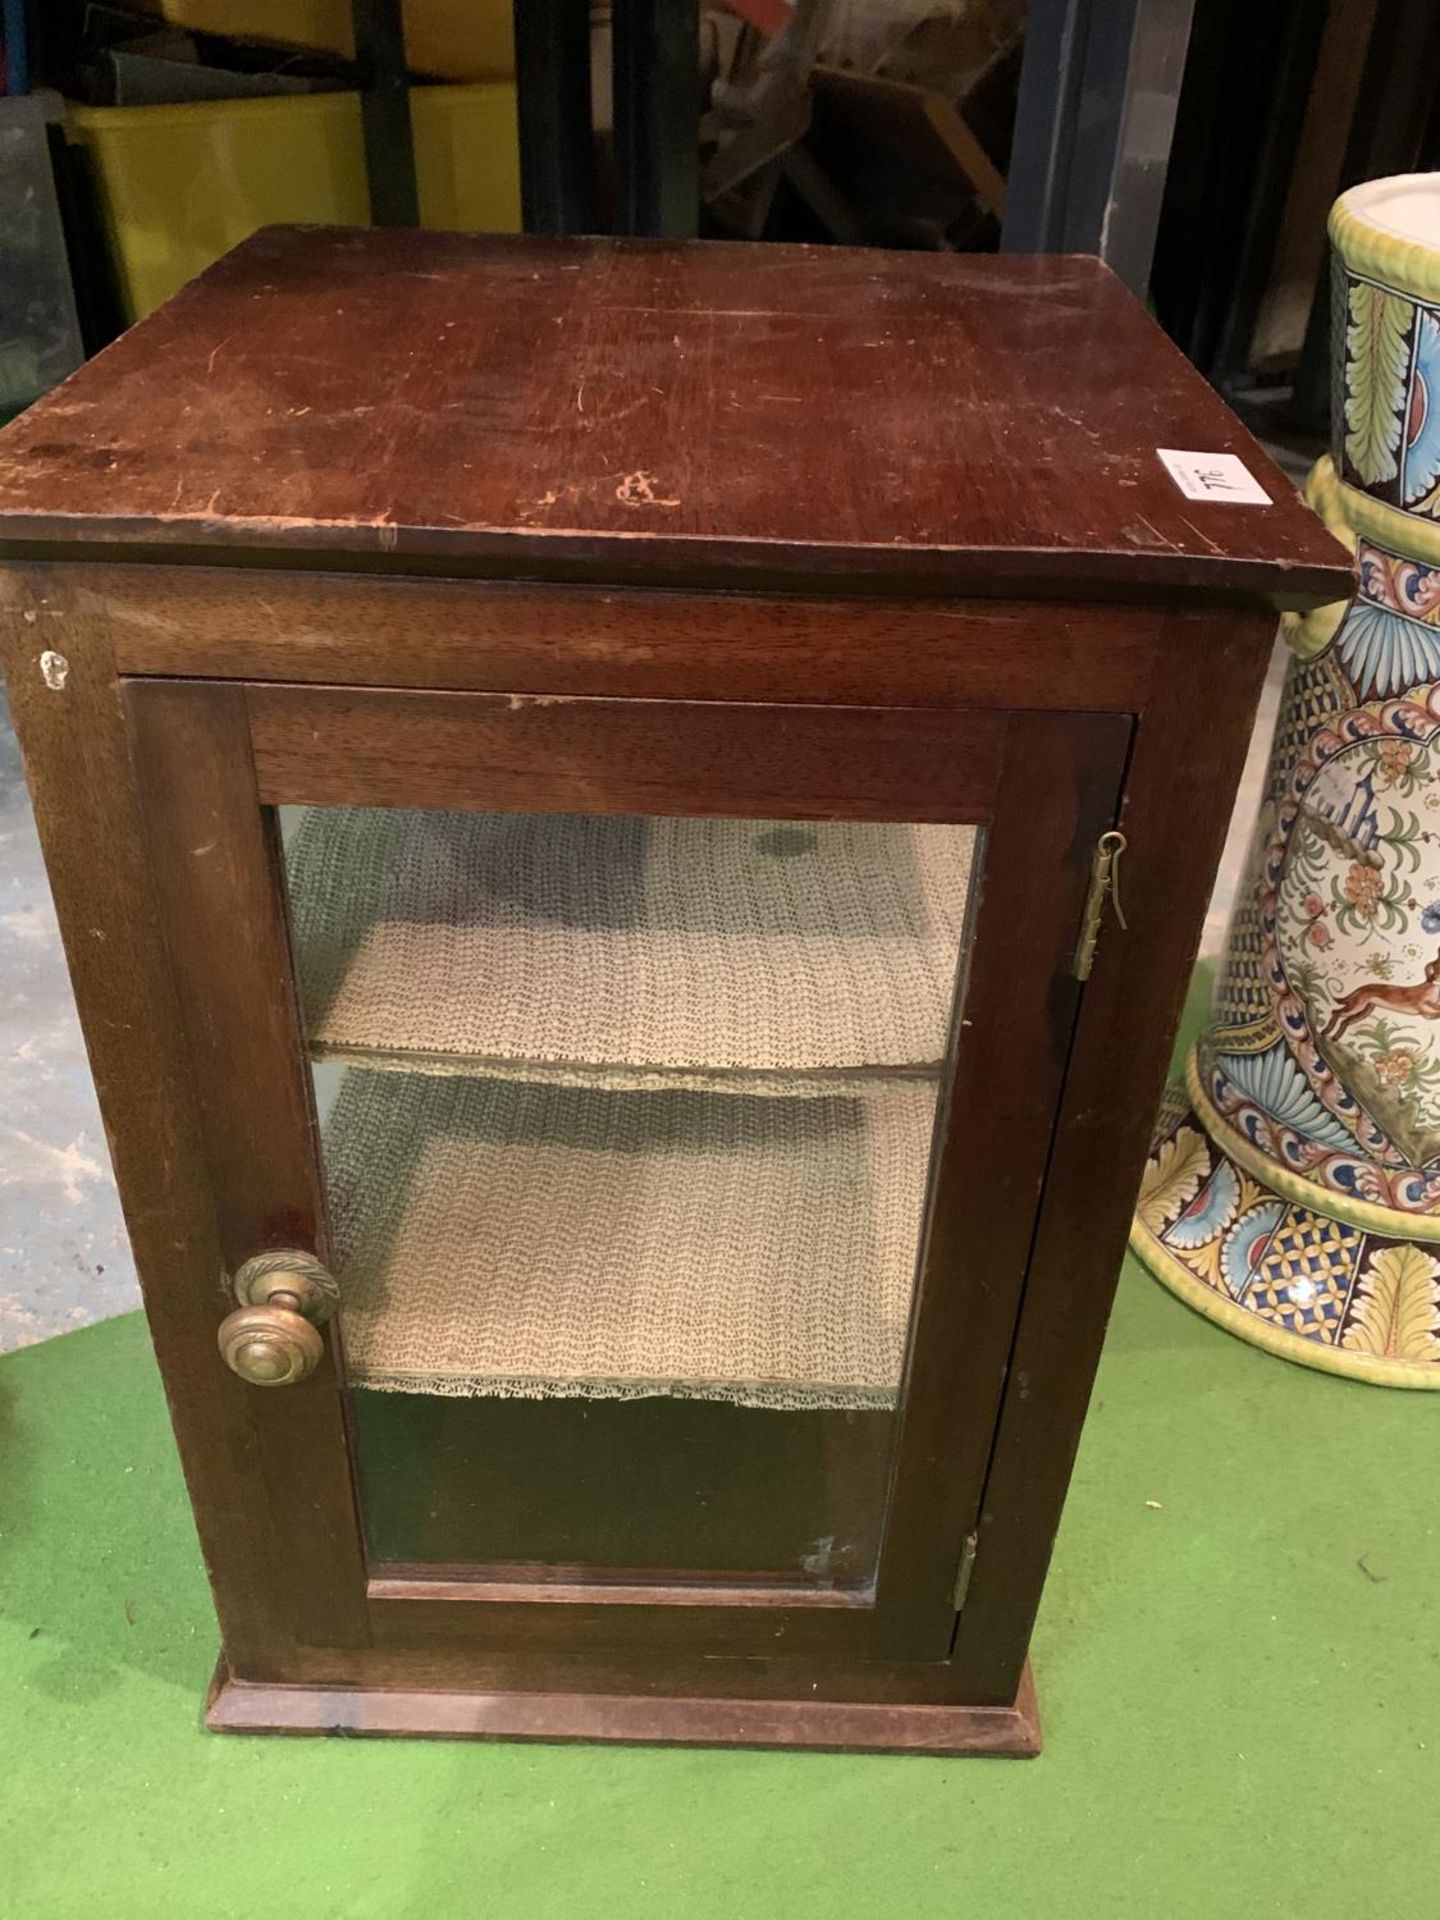 A VINTAGE WOODEN COUNTER TOP SHELVING DISPLAY CUPBOARD